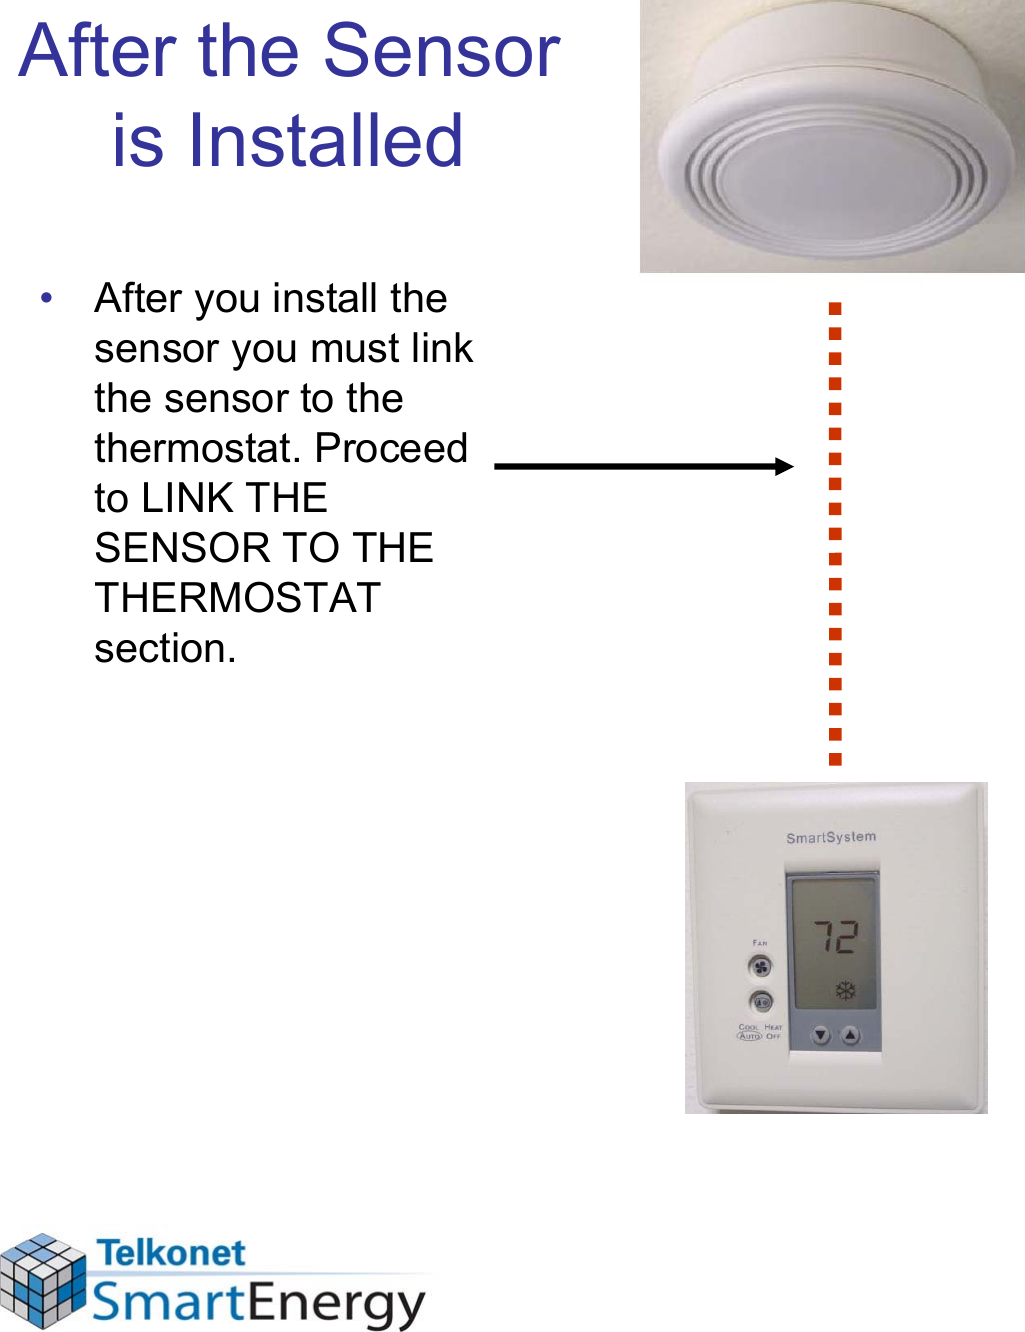 After the Sensor is Installed• After you install the sensor you must link the sensor to the thermostat. Proceed to LINK THE SENSOR TO THE THERMOSTAT section.